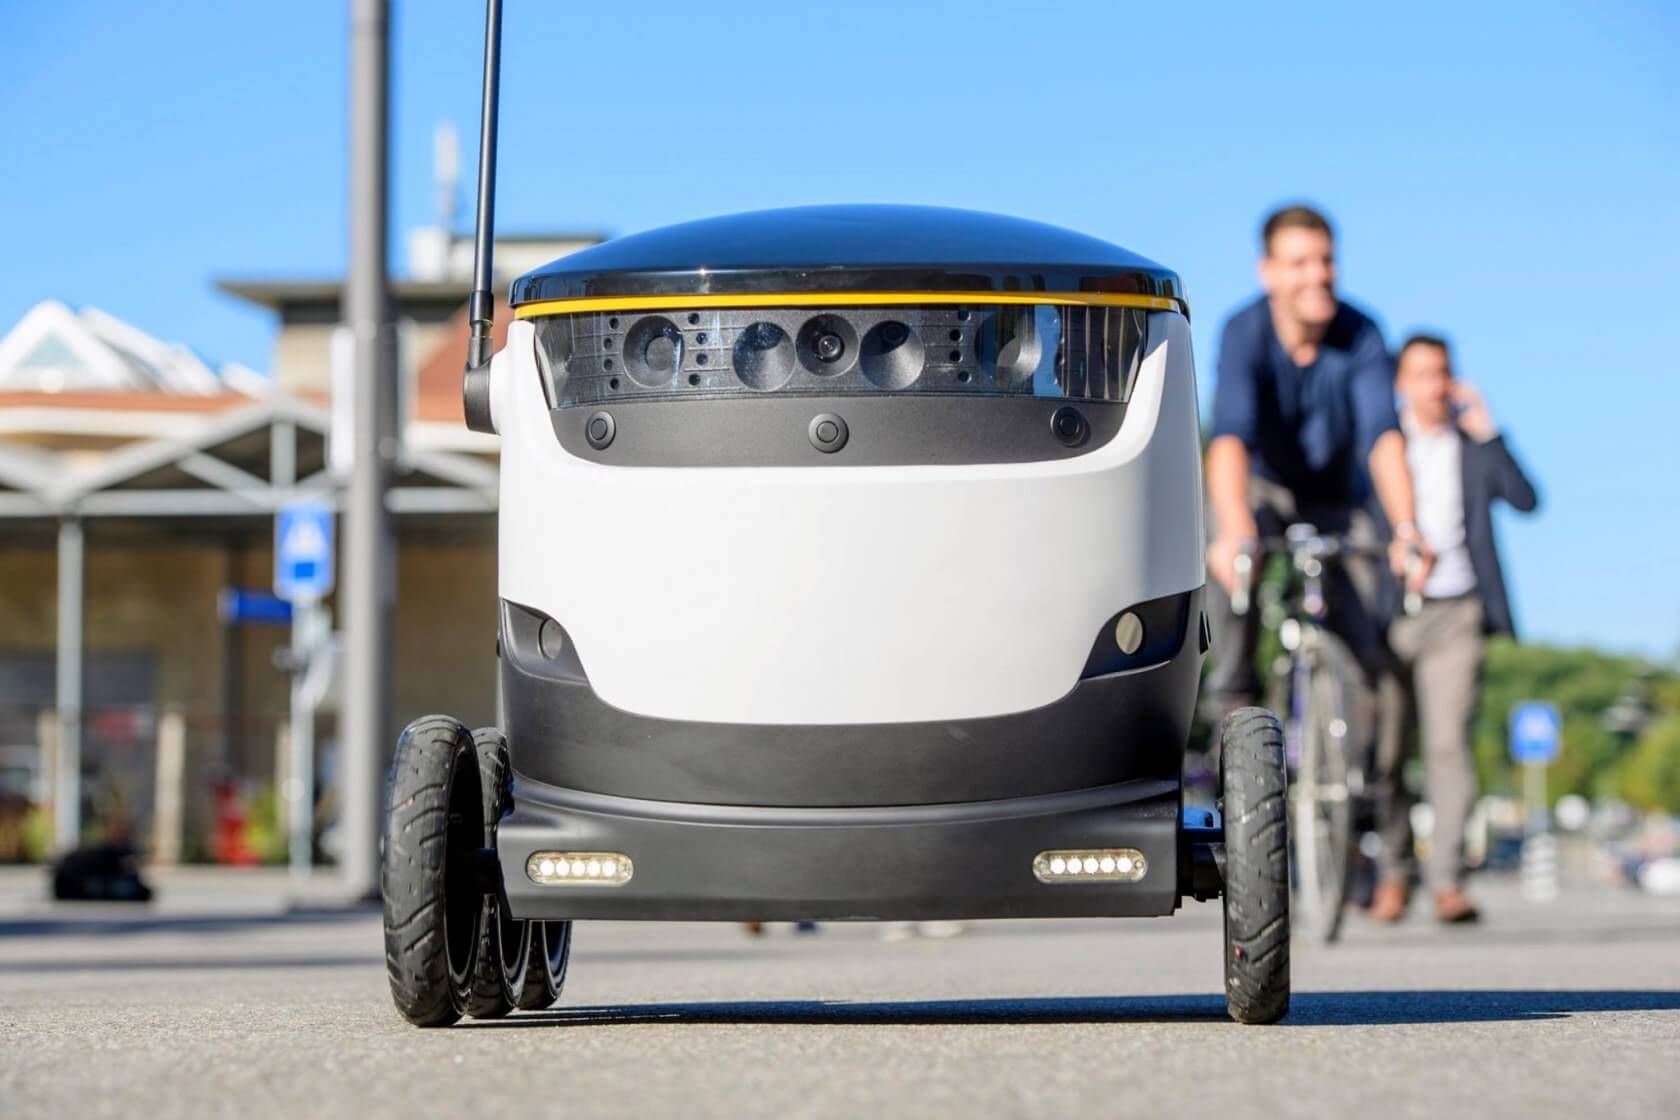 MIT engineers are teaching delivery robots how to navigate to your doorstep